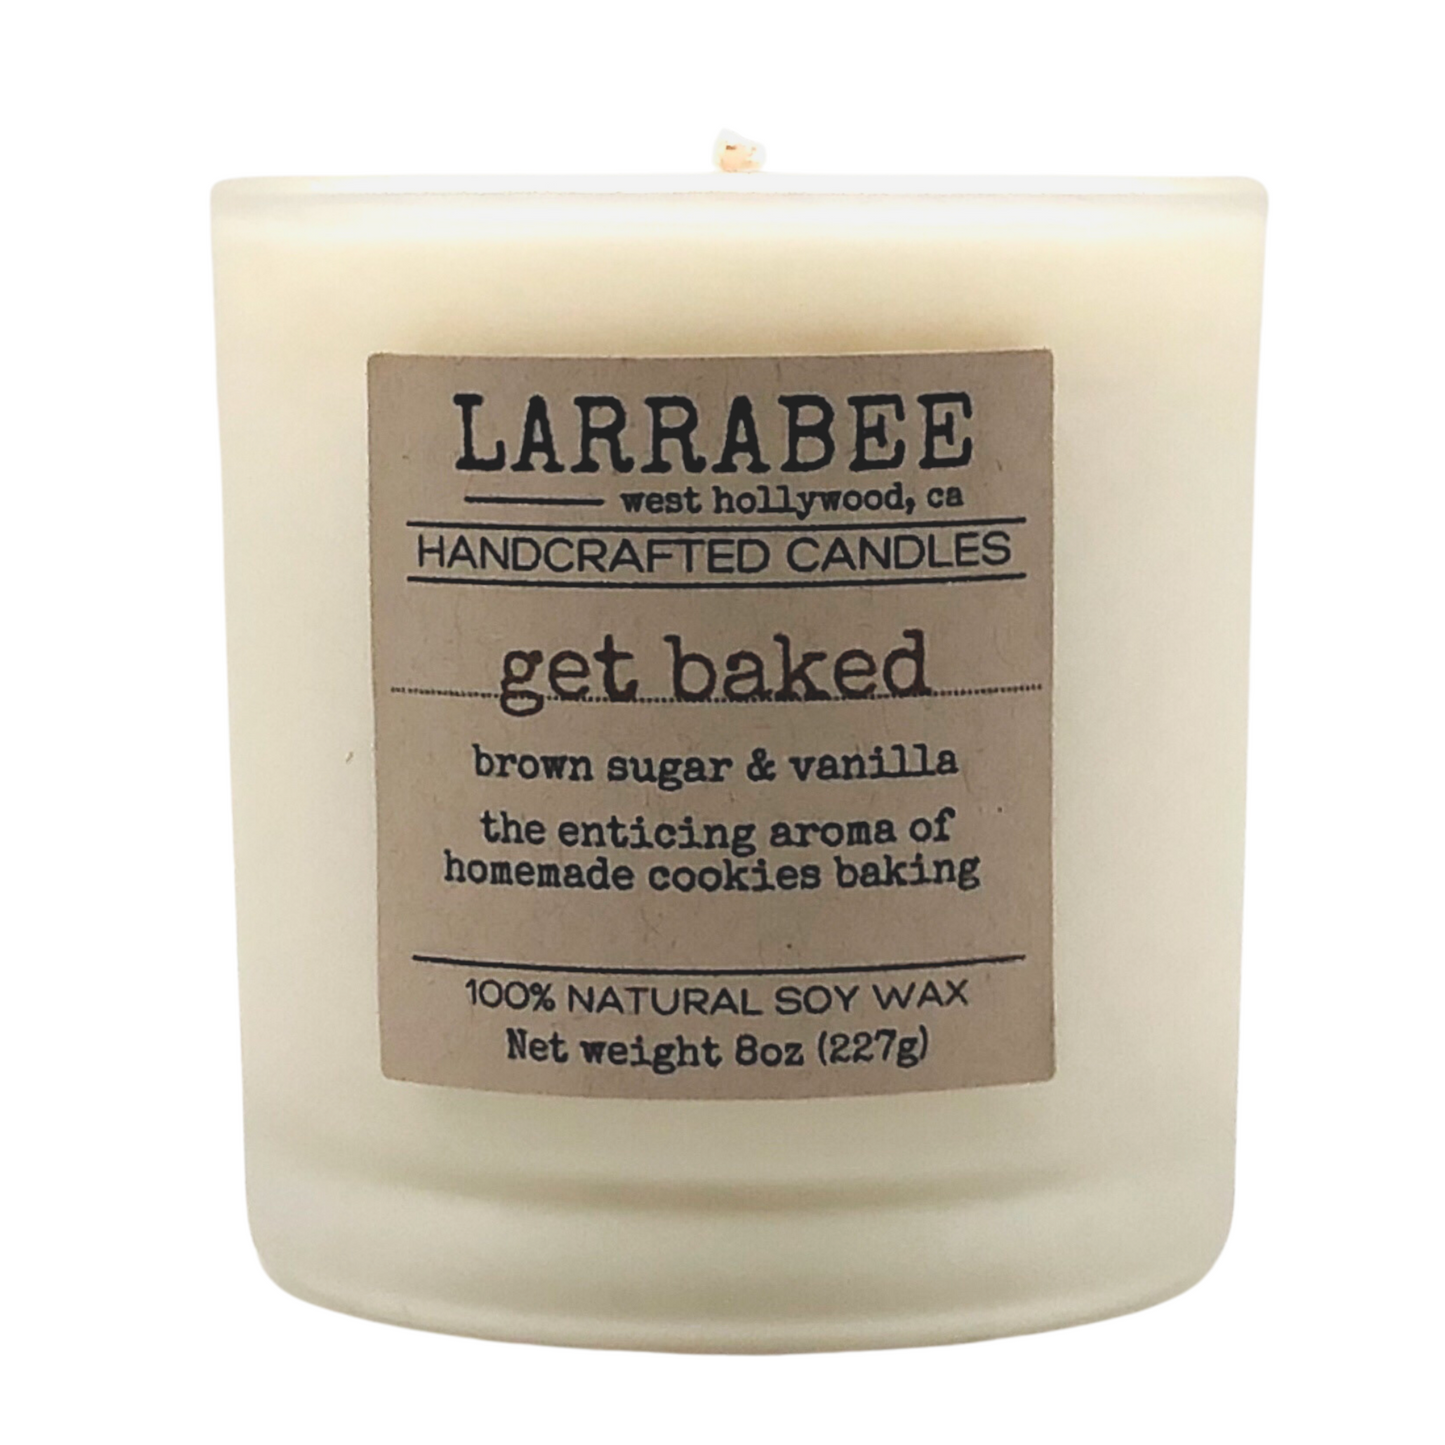 Get Baked handcrafted candle